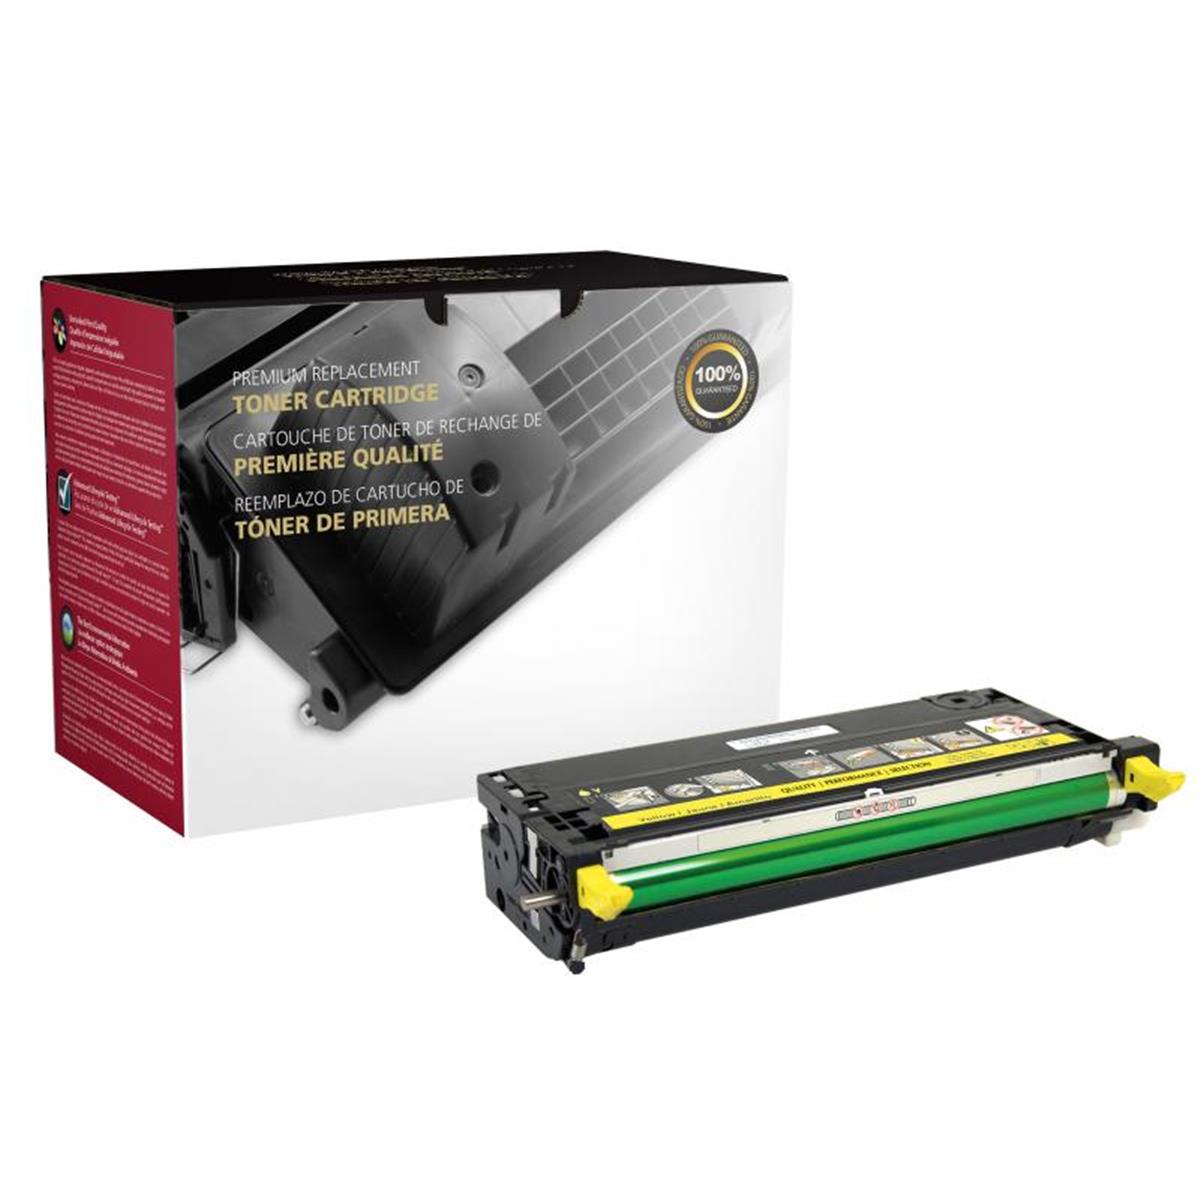 Picture of Dell 200117 High Yield Yellow Toner Cartridge for Dell 3110 & 3115